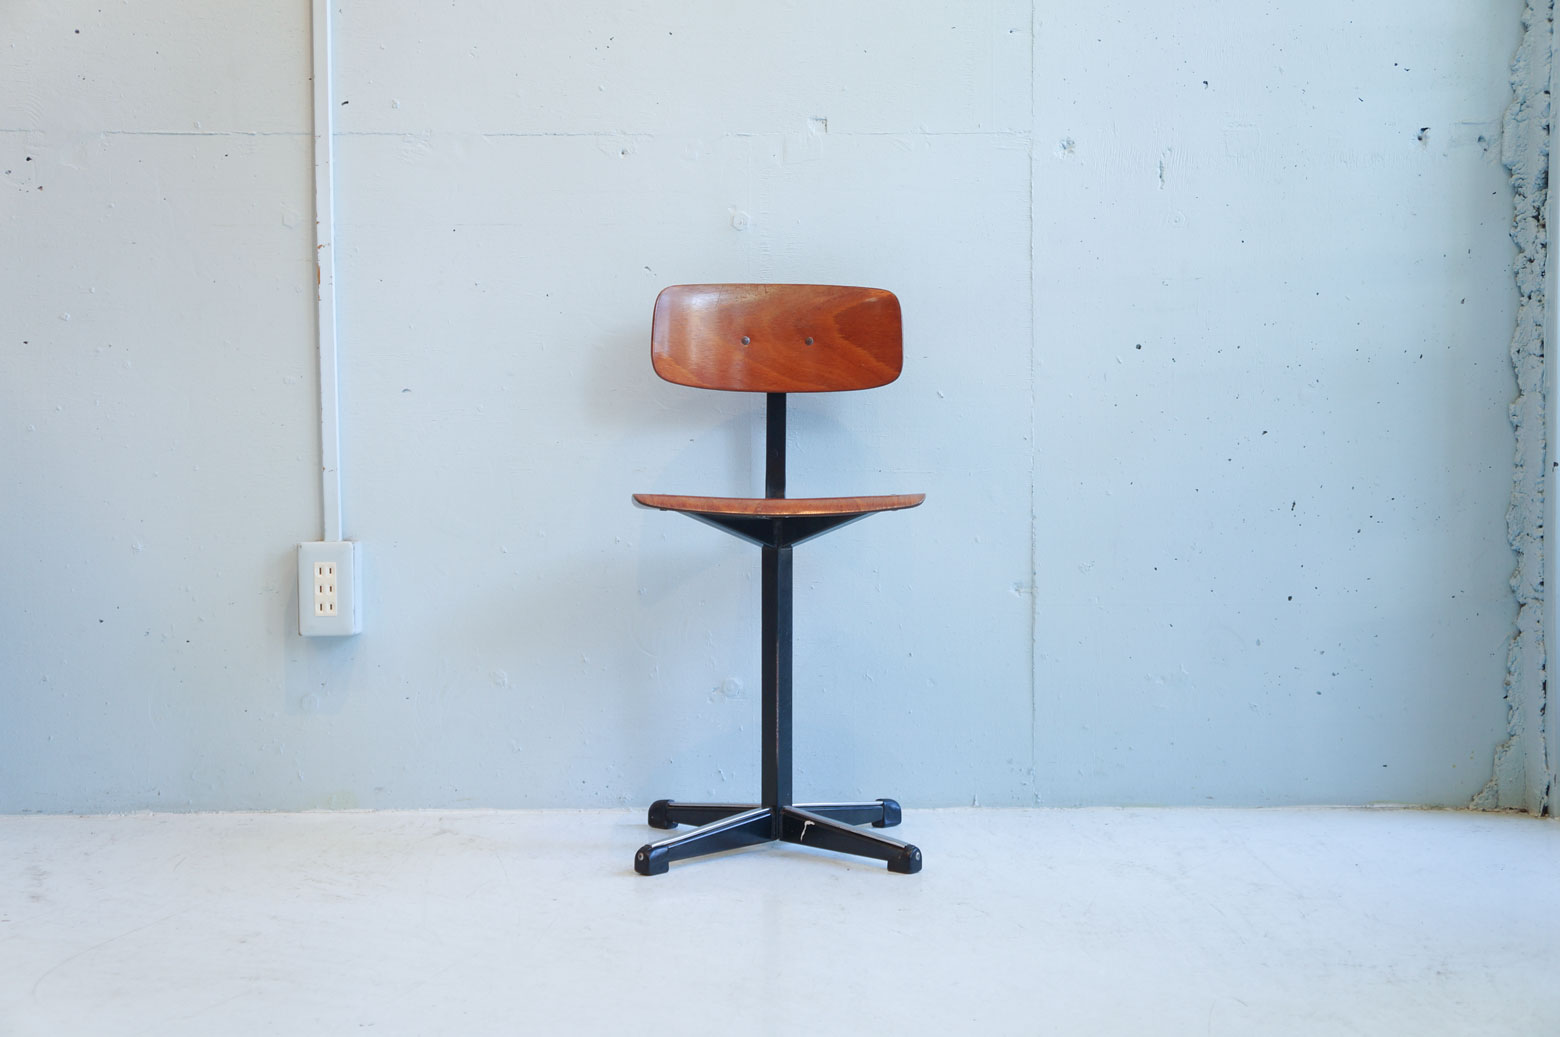 UK Vintage Kids Chair Industrial design/イギリス ヴィンテージ キッズ チェア インダストリアル デザイン 2